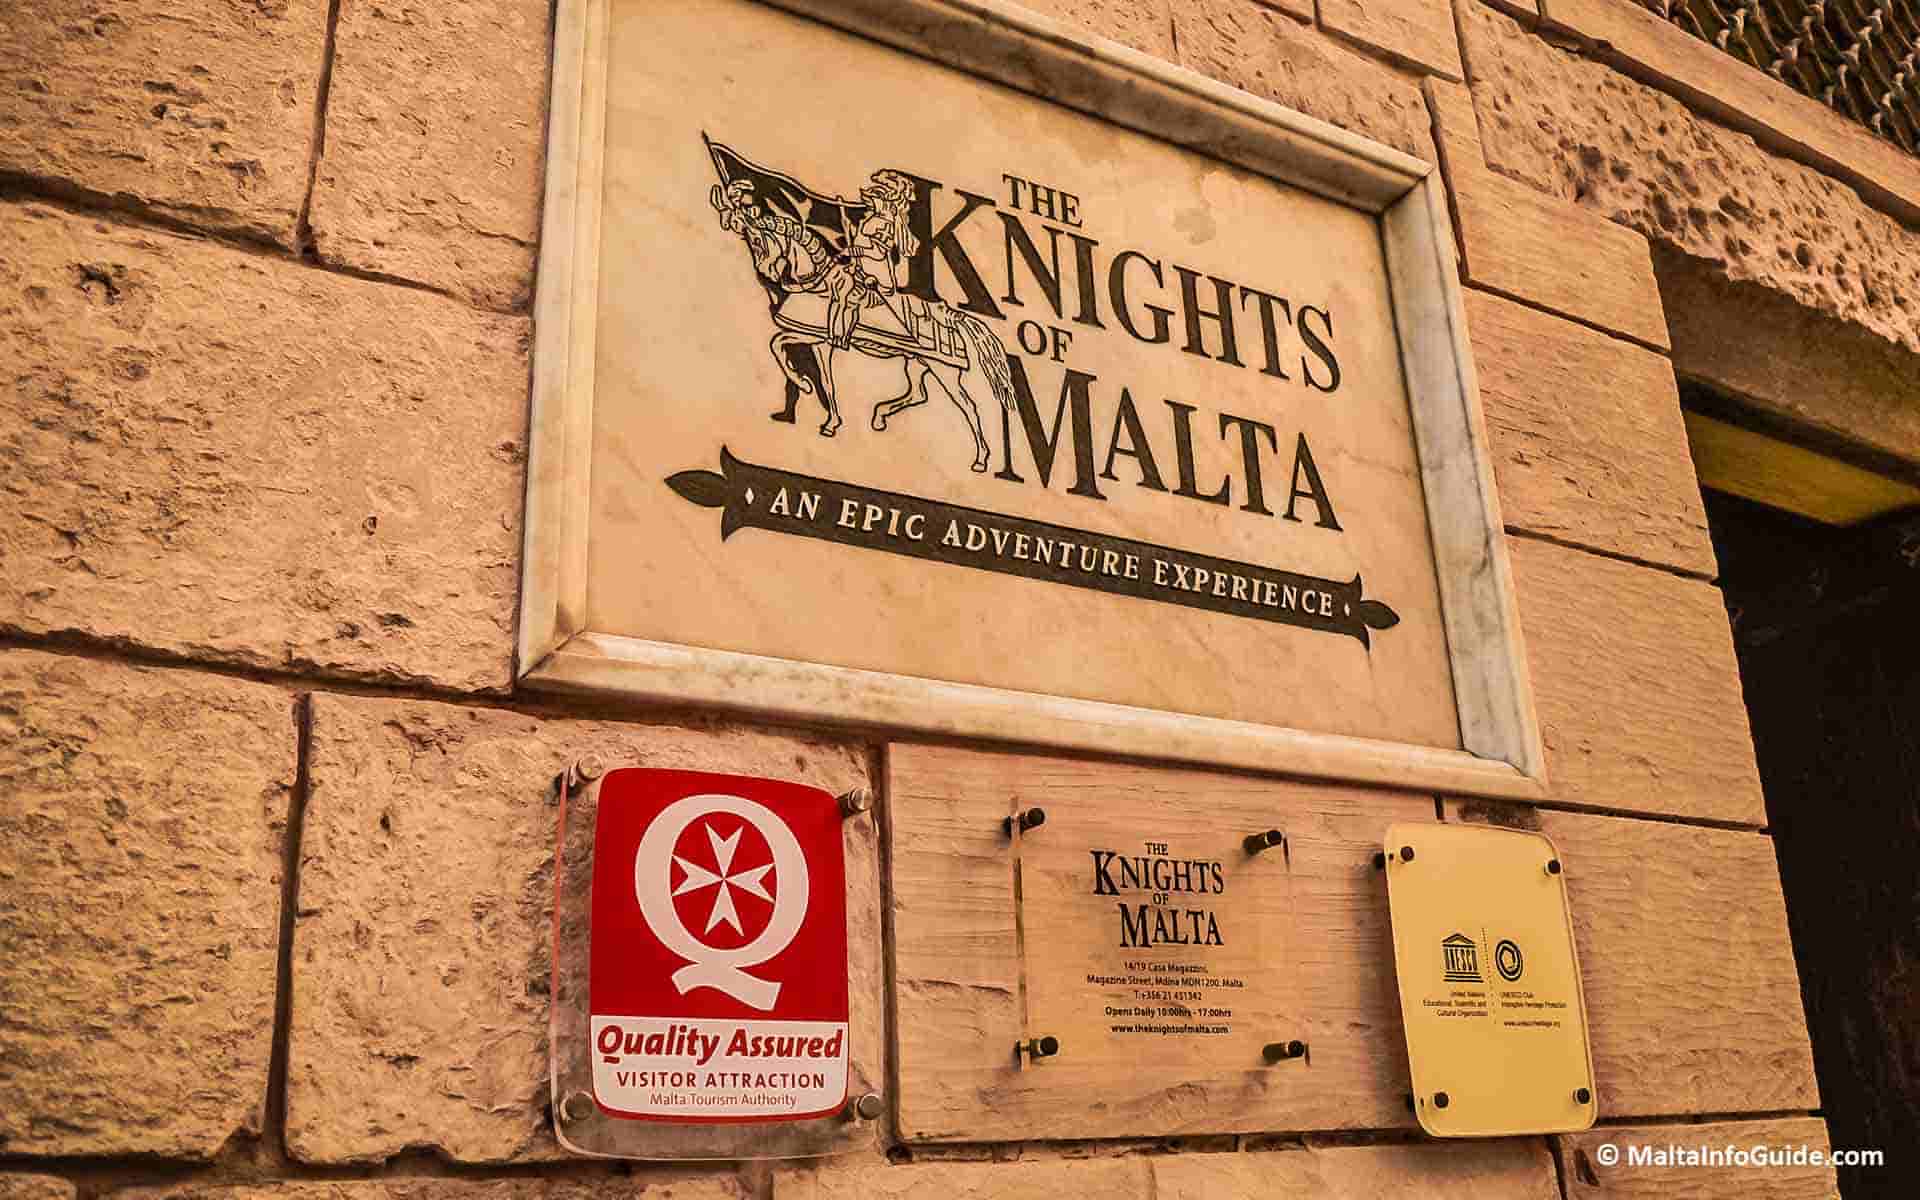 The Knights of Malta museum